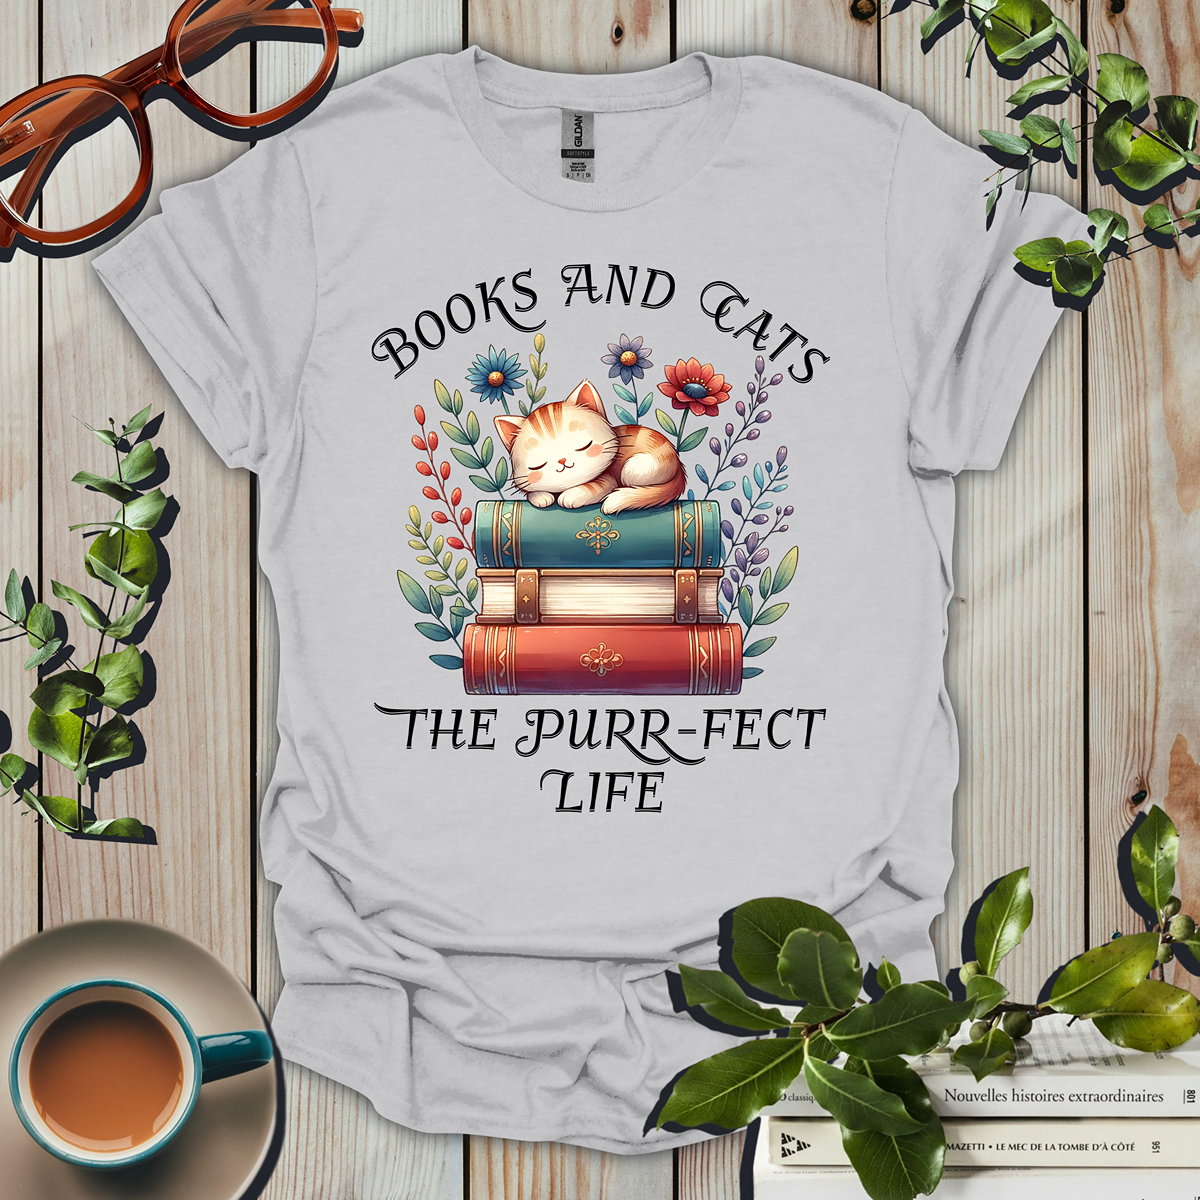 Books And Cats The Purr-Fect Life T-Shirt